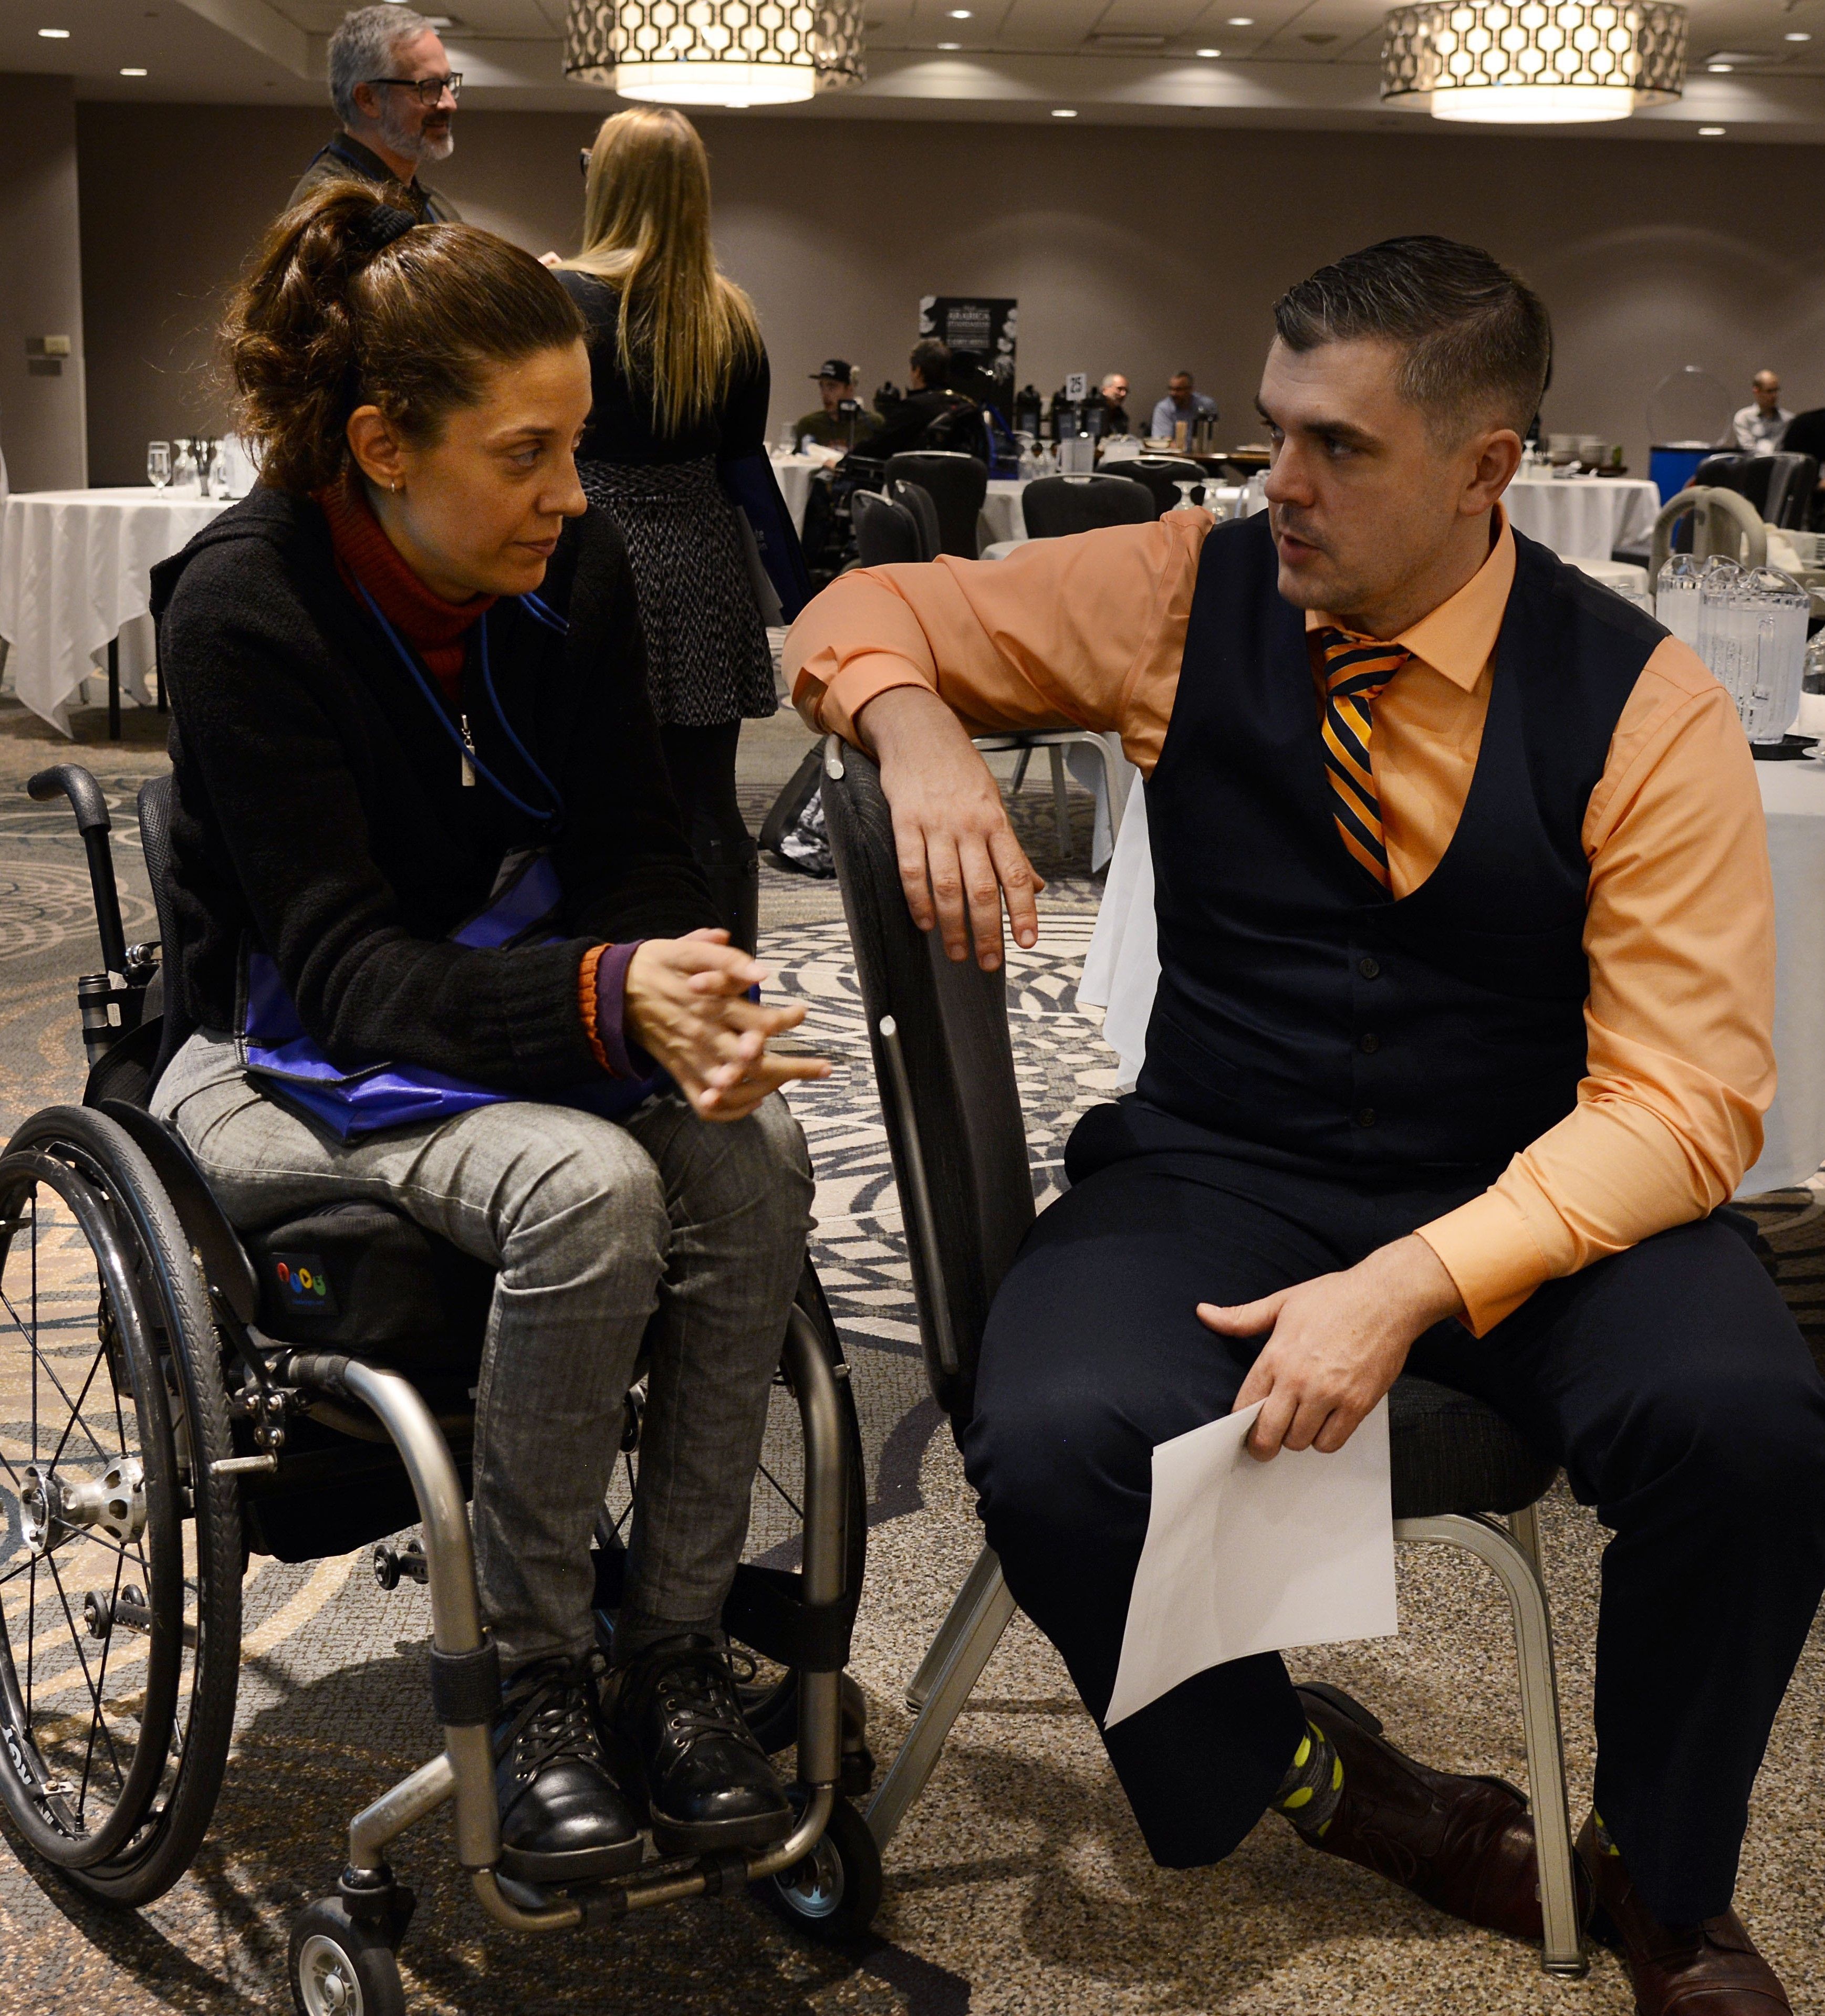 Woman in a wheelchair speaking with a man on a chair to her right